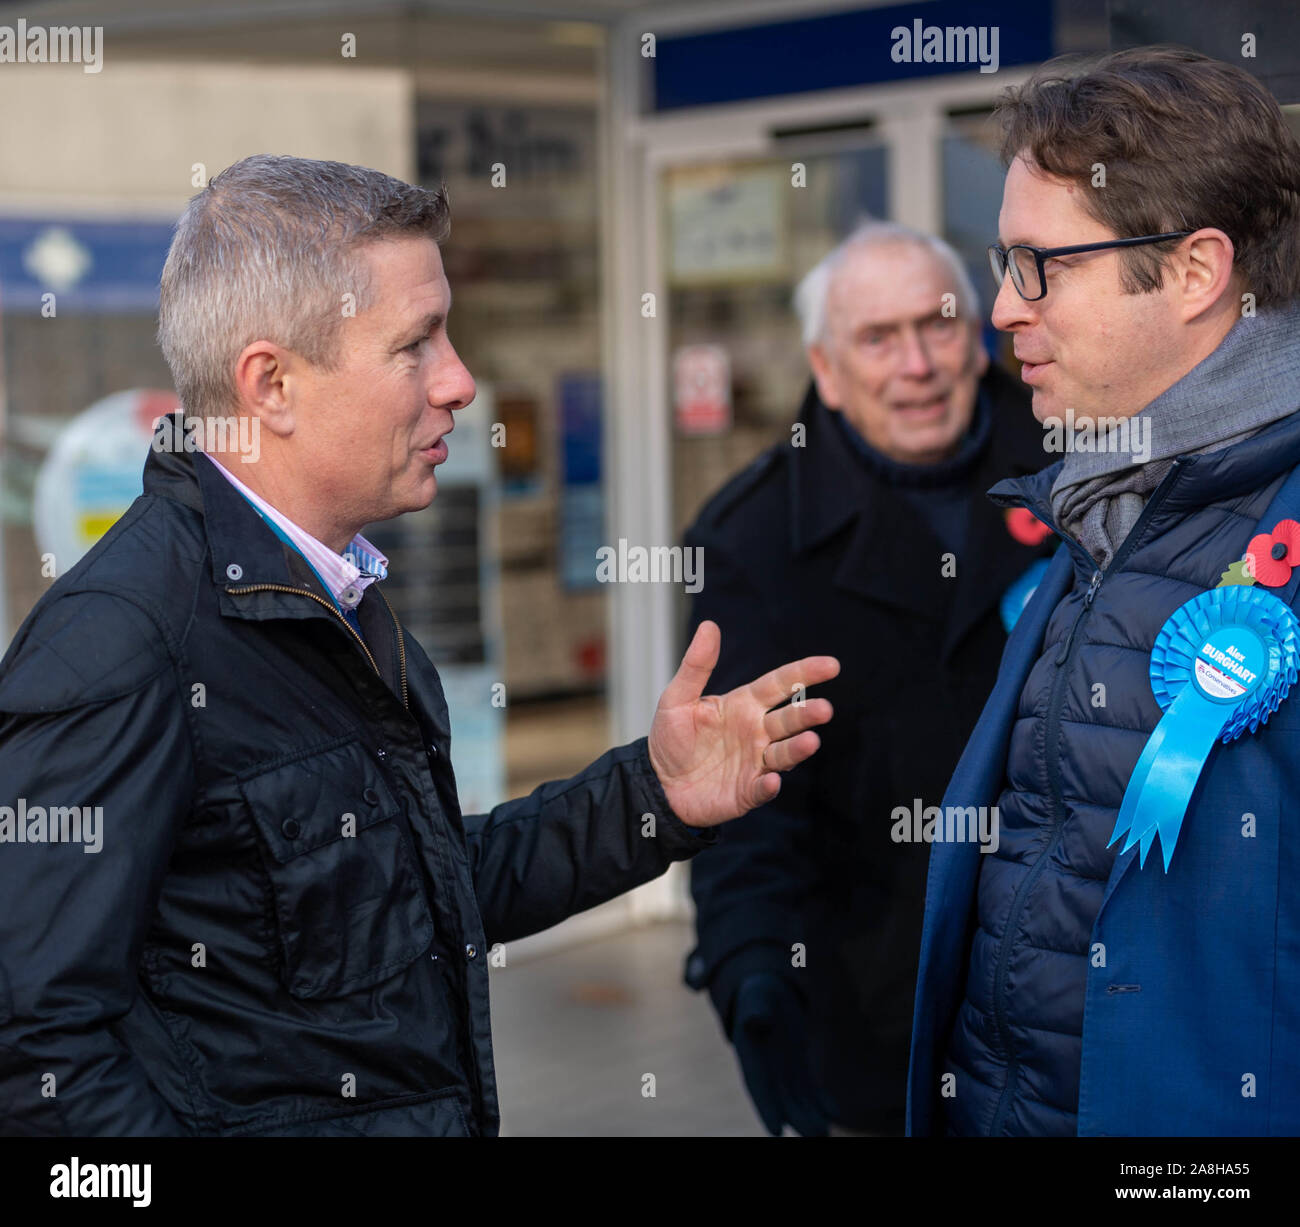 Brentwood Essex UK 9th Nov 2019 General Election, Alex Burghart, conservative candidate  for Brentwood and Ongar constitunecy and former Private Parliamentary Secretary to Boris Johnson, out campaigning with his team in Brentwood Essex UK  Michael Bond, Headmaster of Brentwood School (left) talks to Alex Burghart (Right) Credit Ian DavidsonAlamy Live News Stock Photo